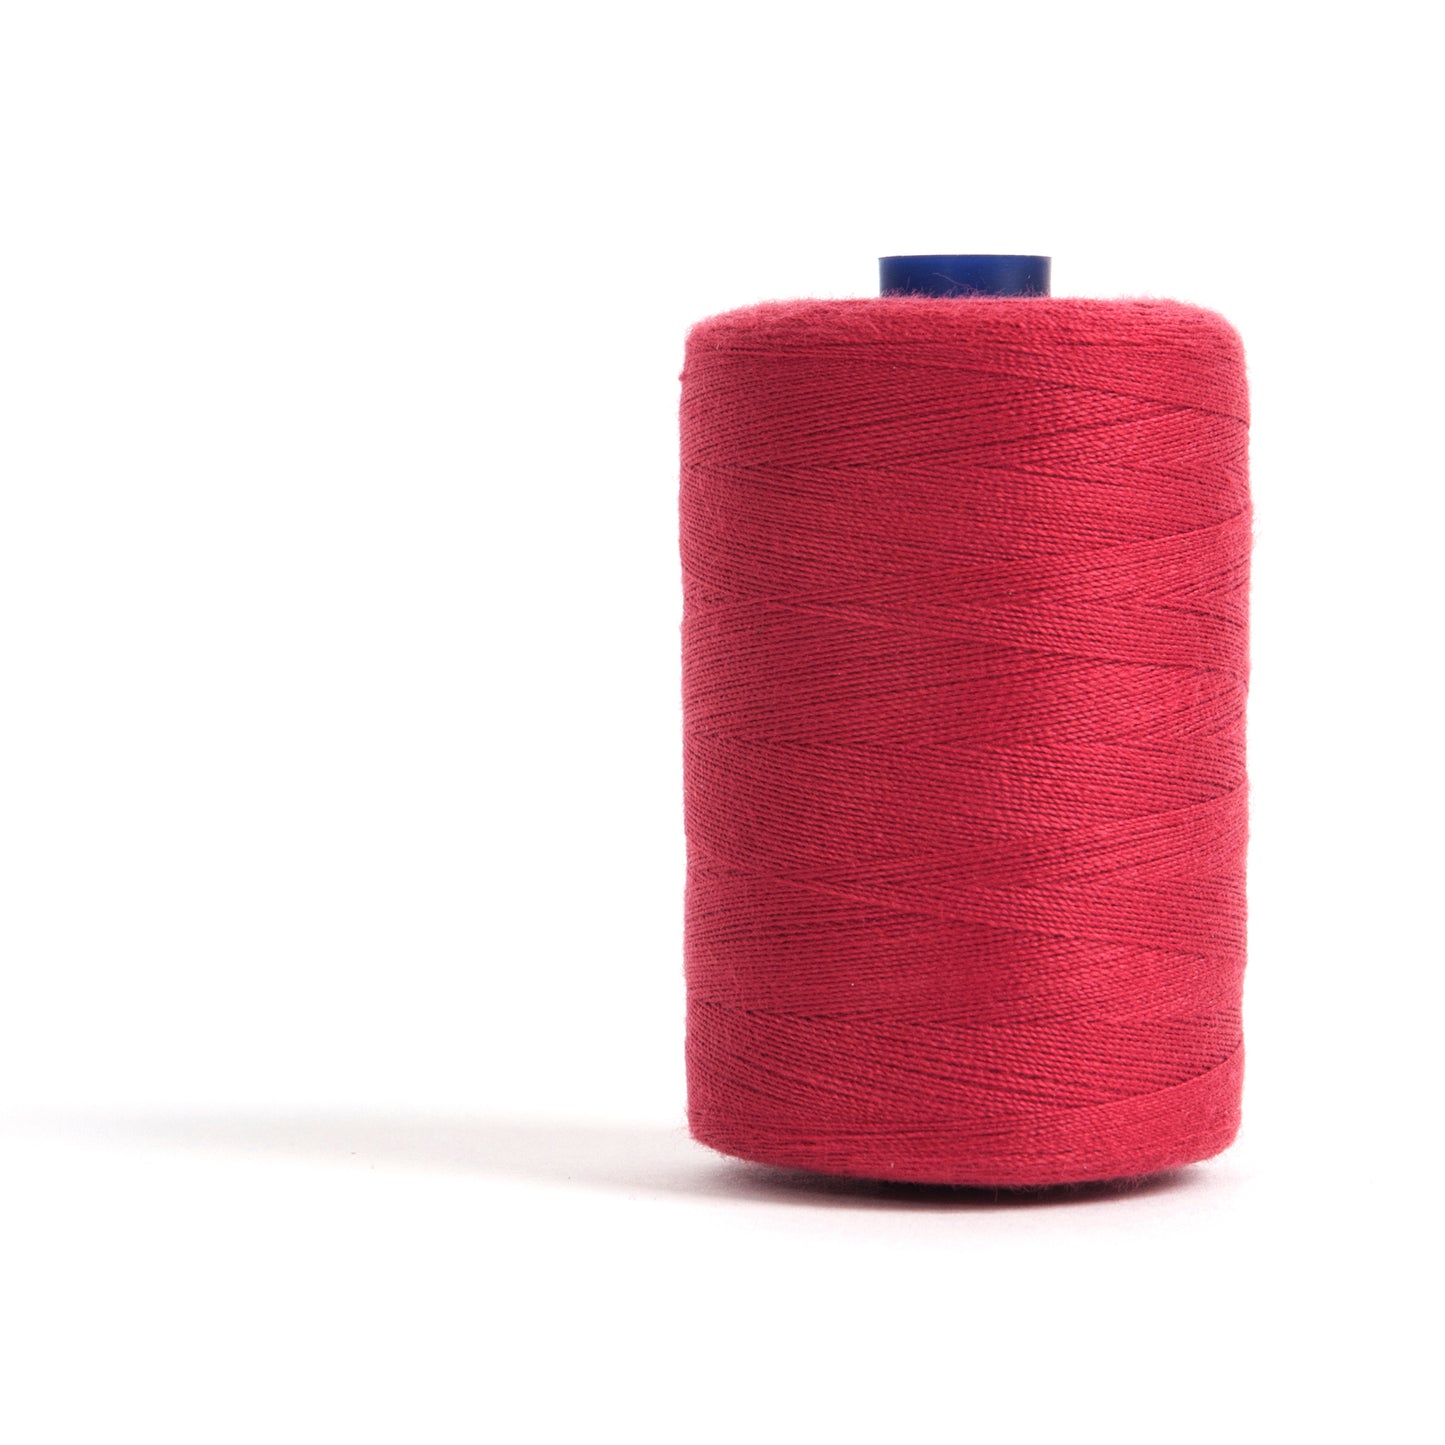 Sewing and Overlocking Thread: 1,000m: Grape